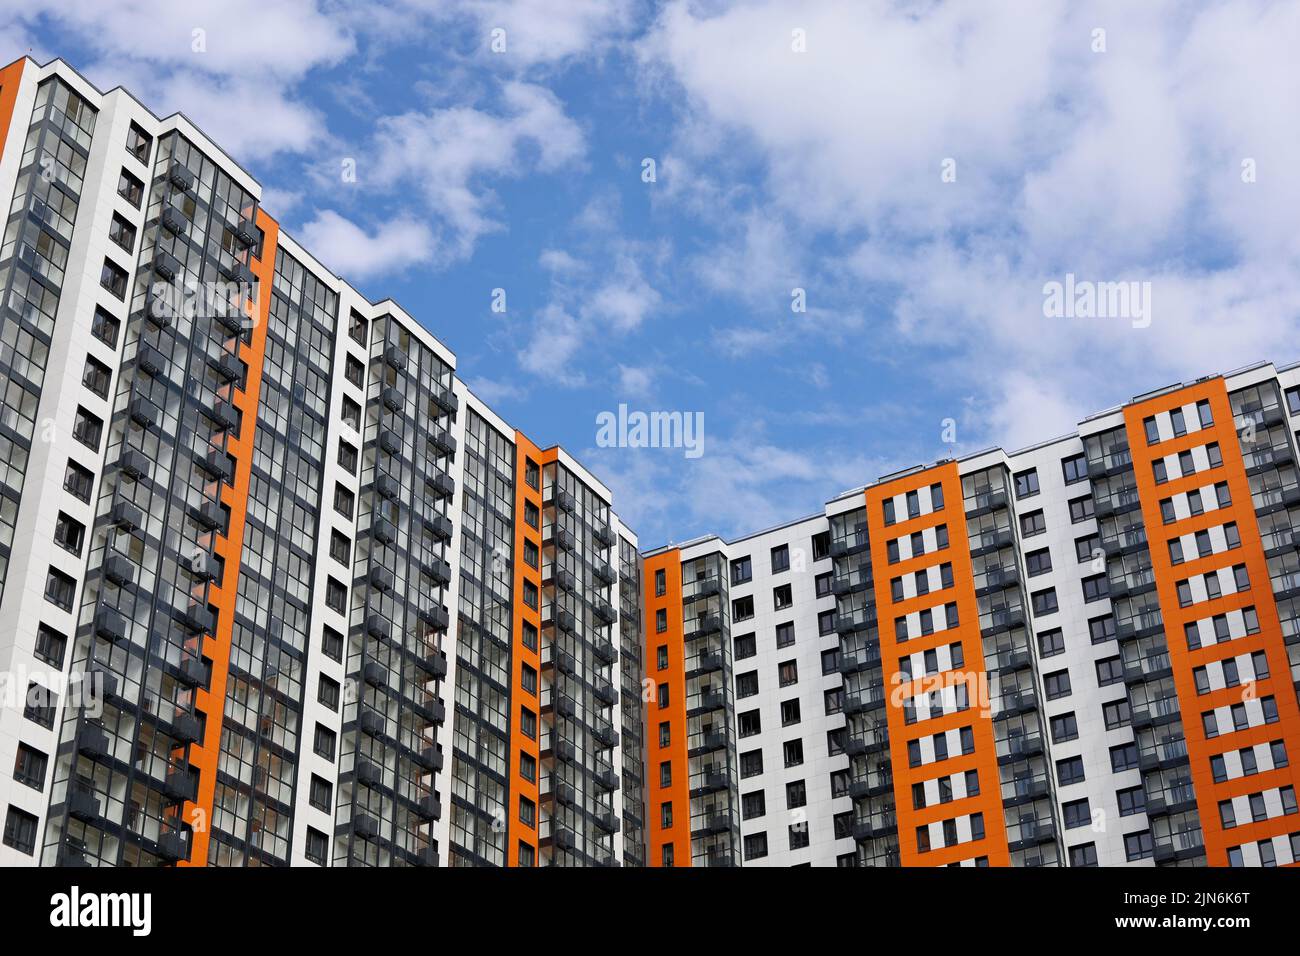 New residential building with orange and white cladding against blue sky with clouds. House with balconies and glazed loggias, high-rise construction Stock Photo